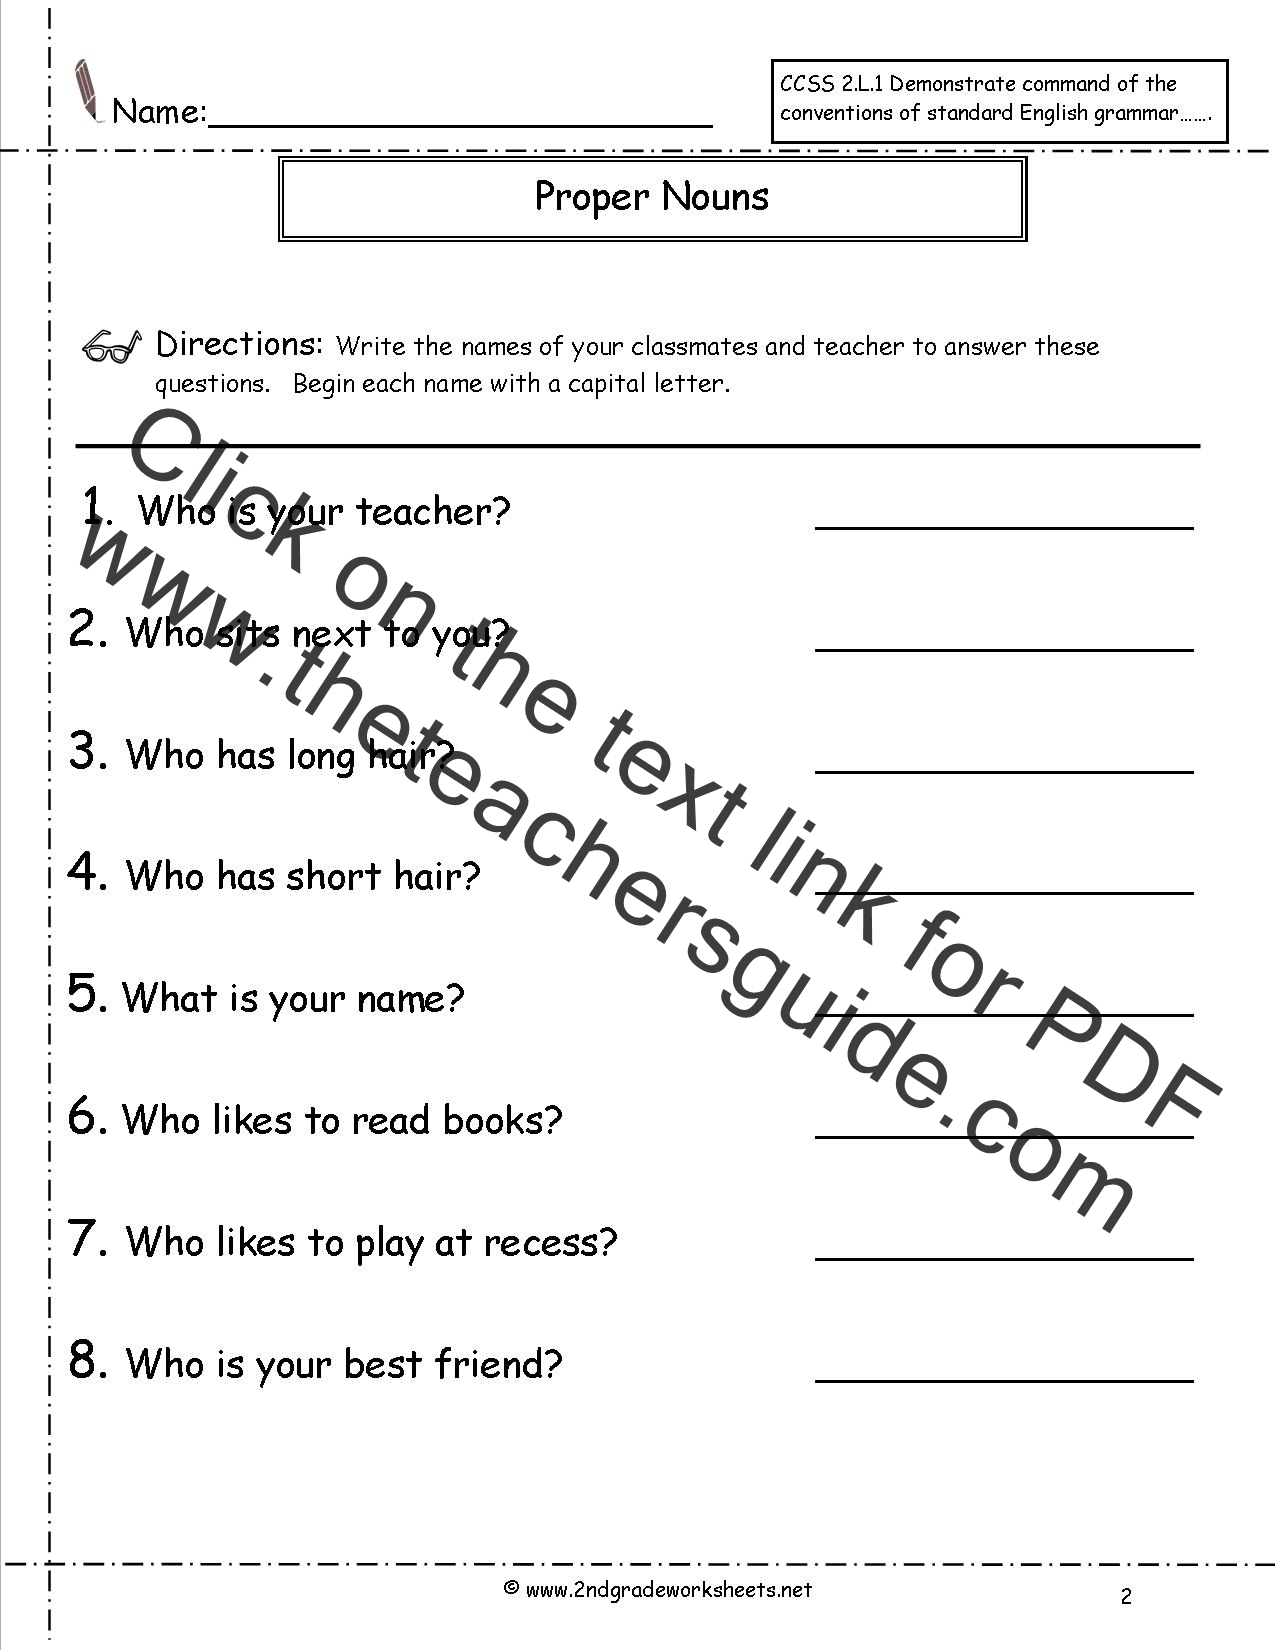 Common And Proper Nouns Worksheet